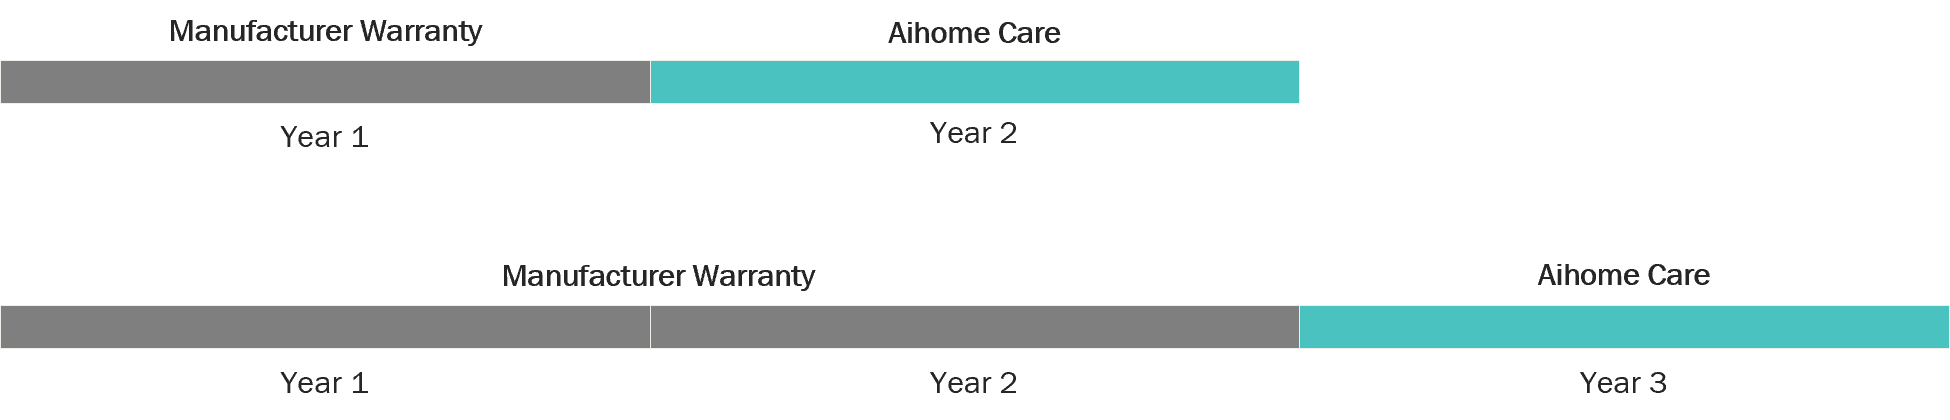 Aihome Care Type of Plans